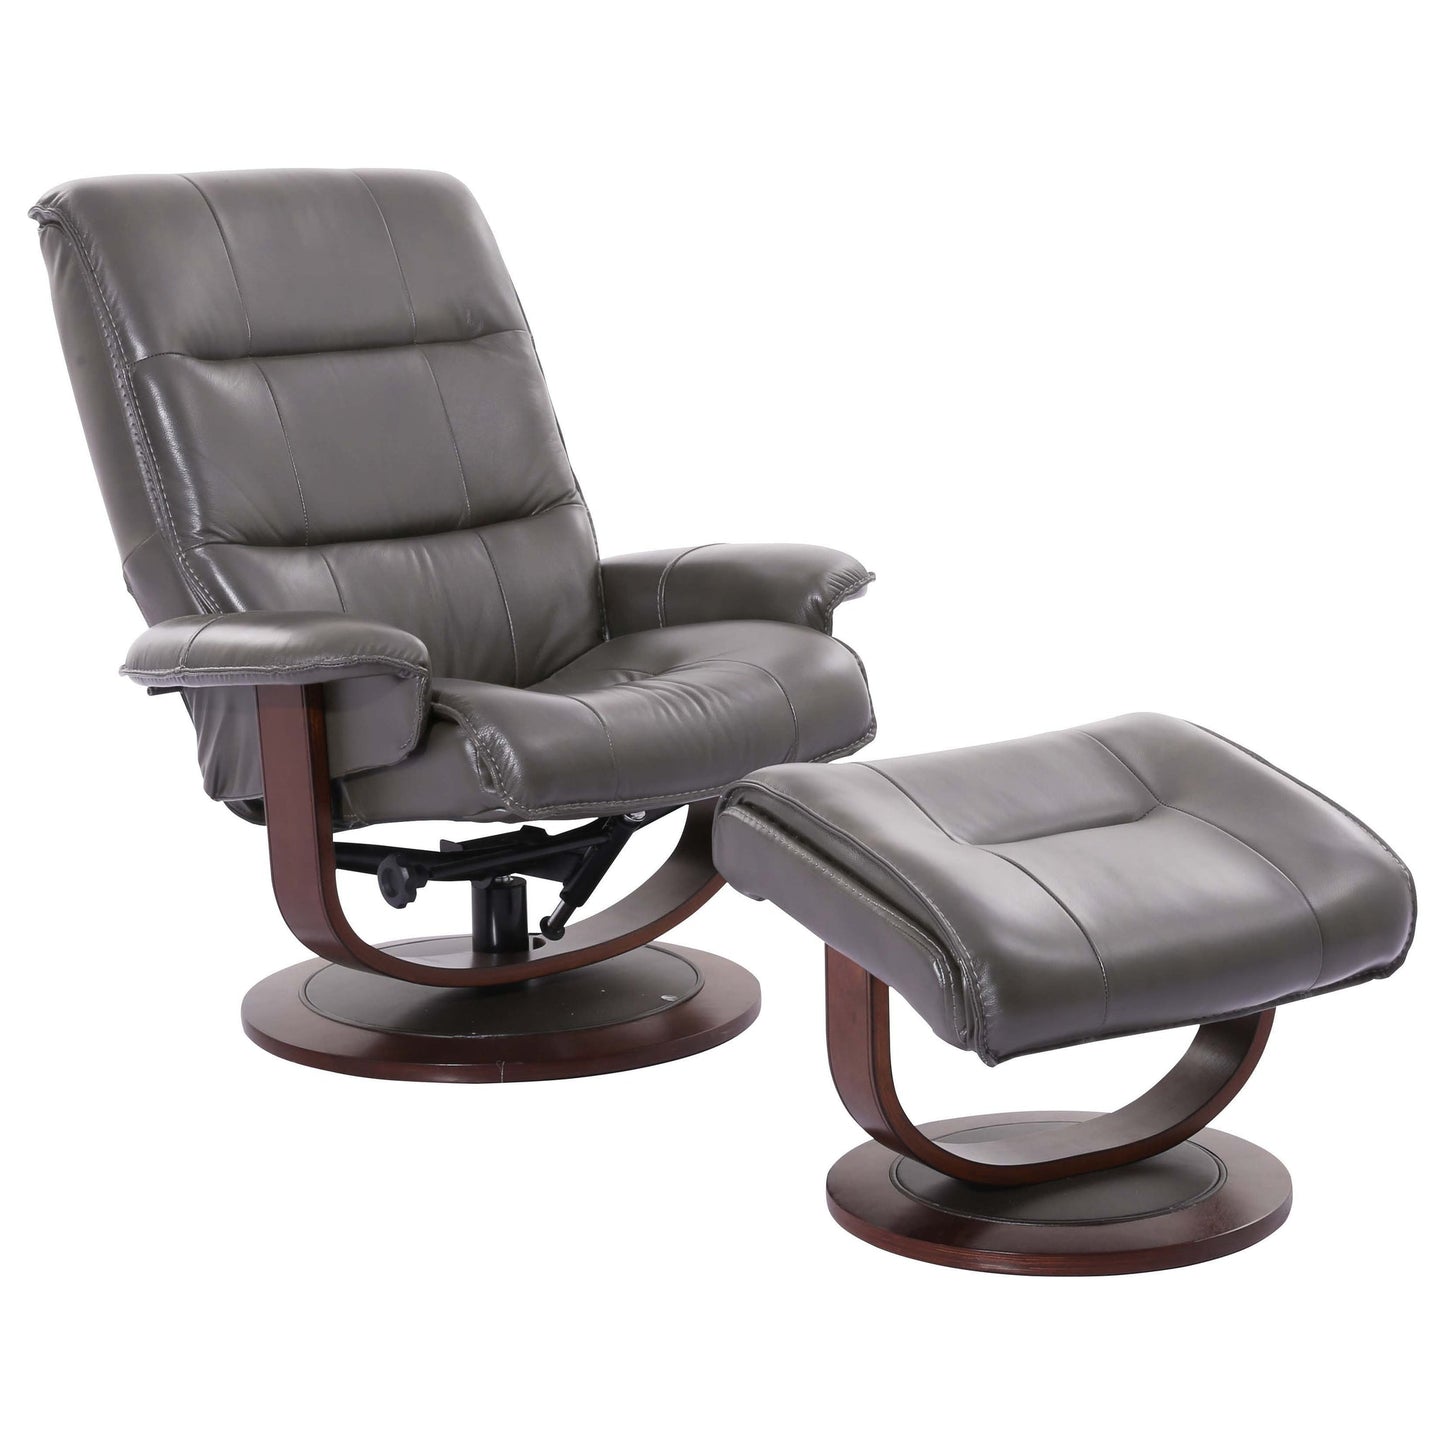 KNIGHT - ICE MANUAL RECLINING SWIVEL CHAIR AND OTTOMAN